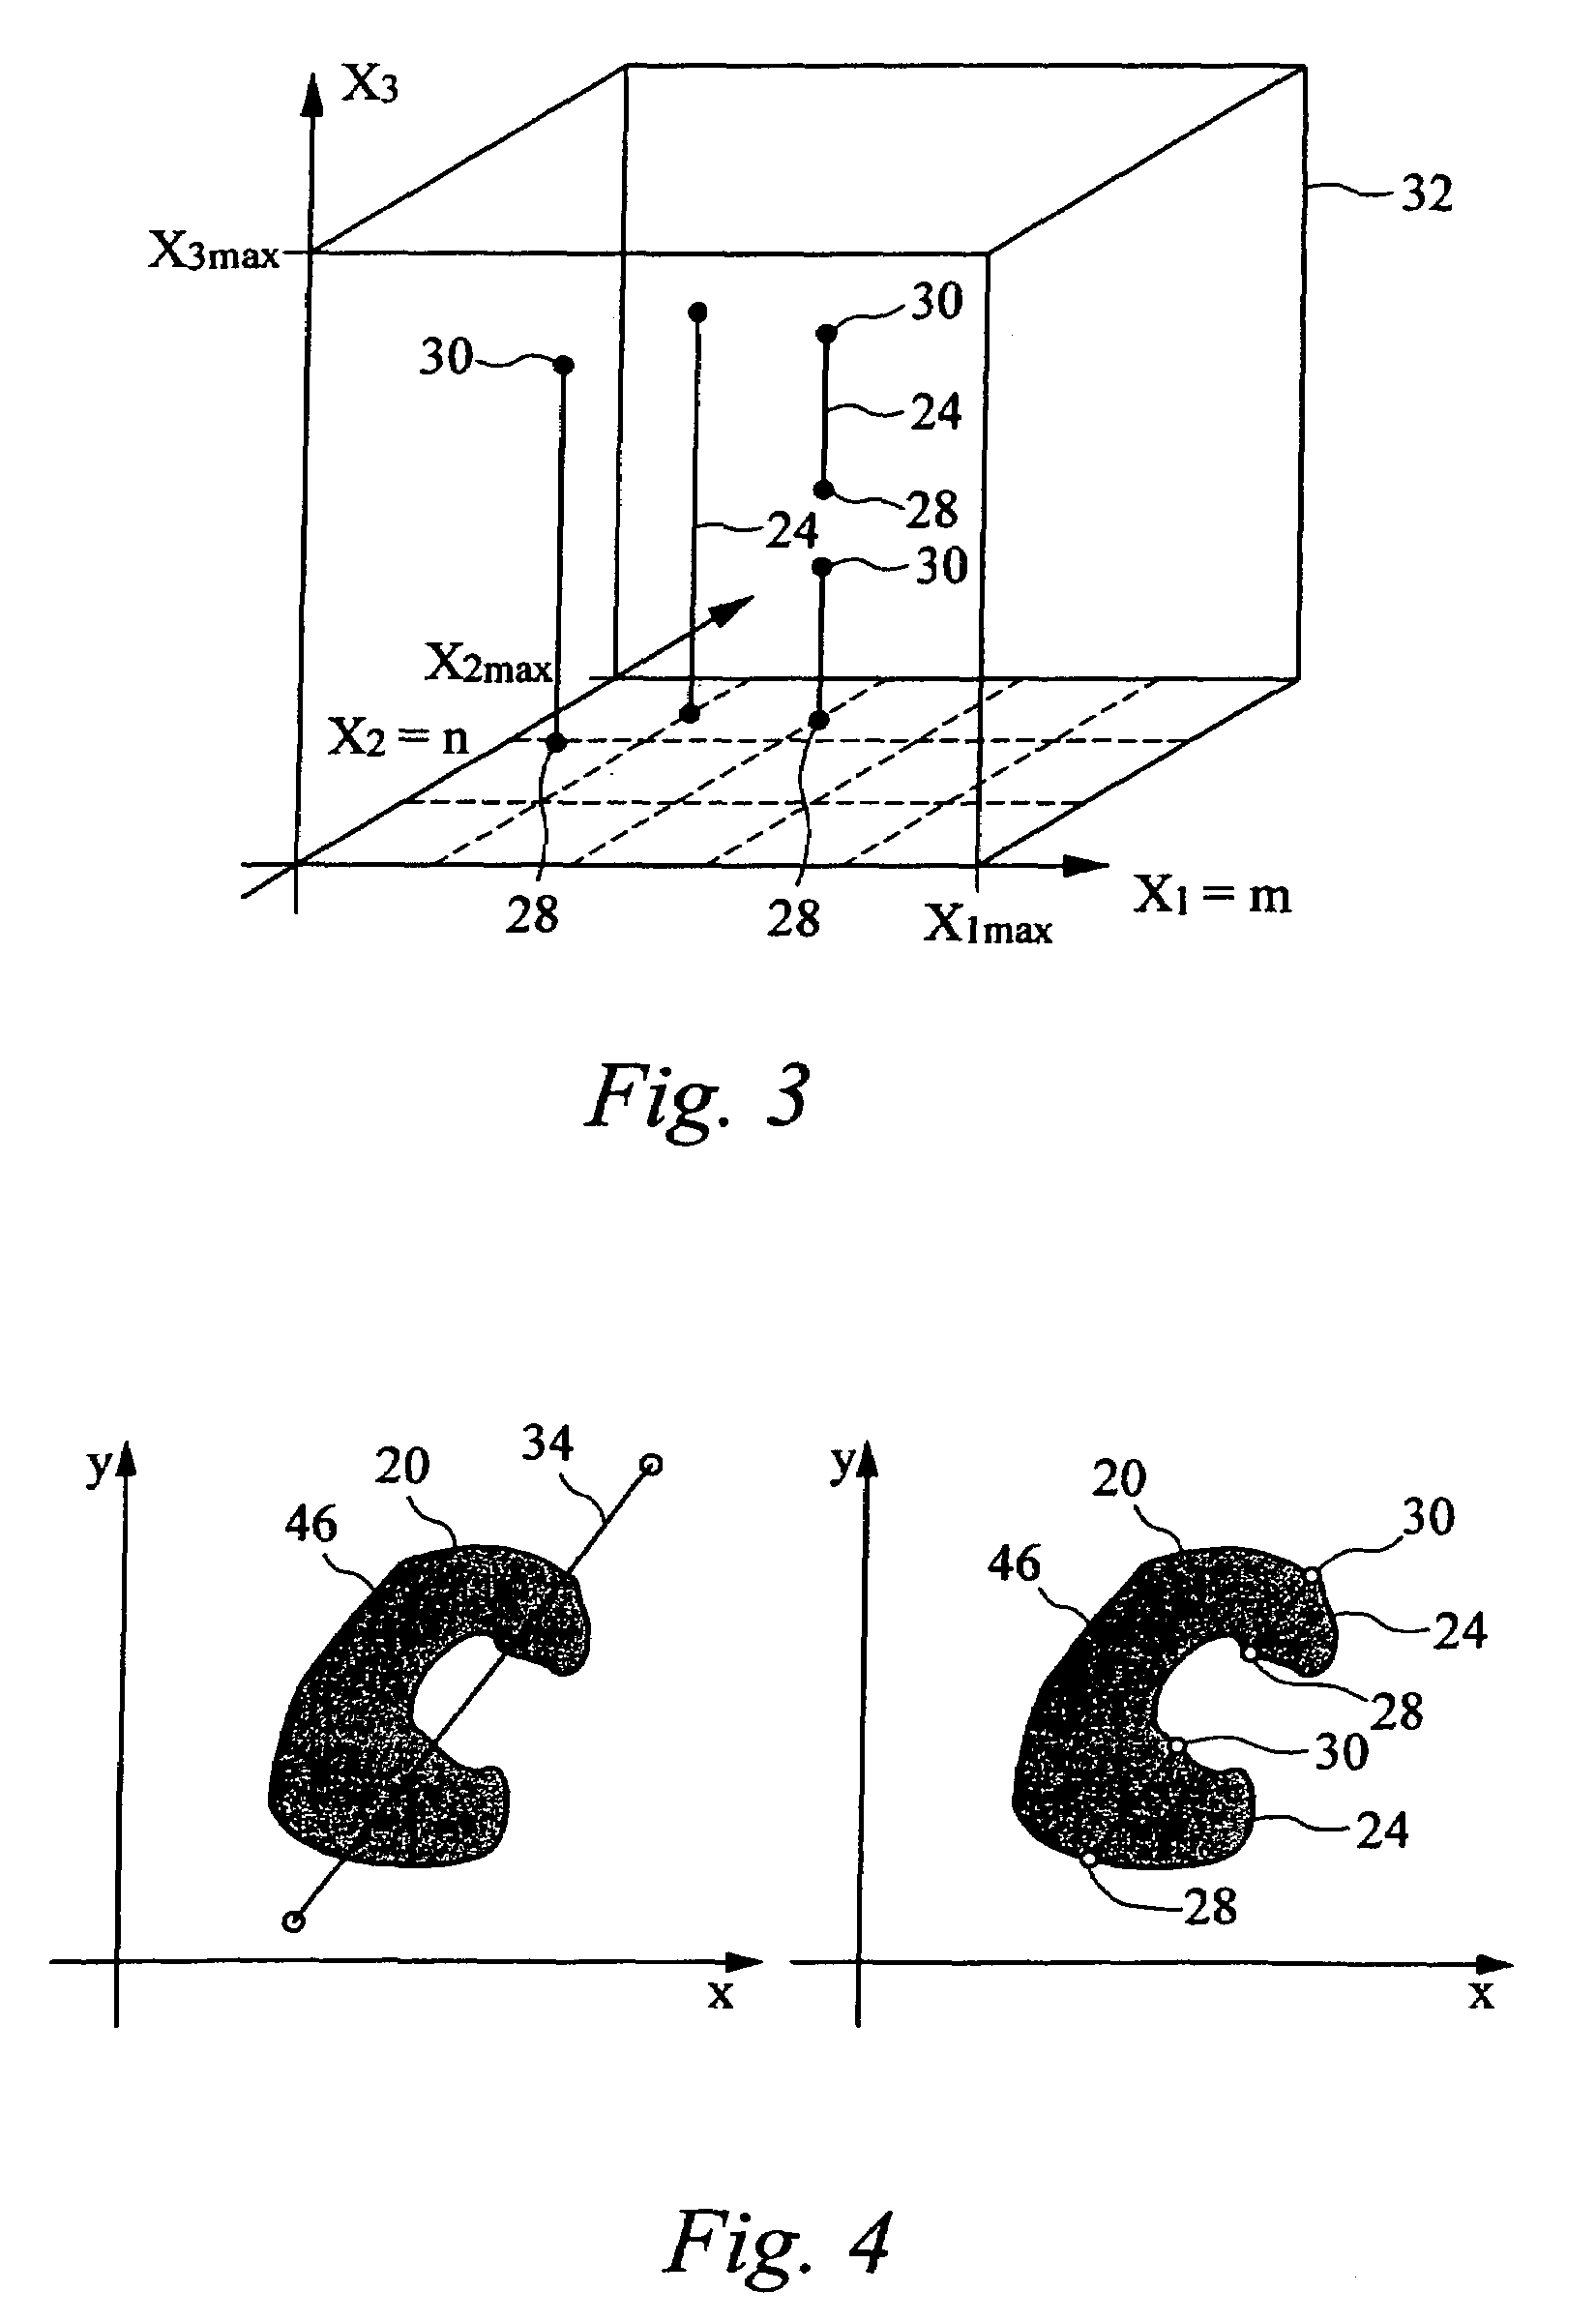 Method and system for providing a volumetric representation of a three-dimensional object